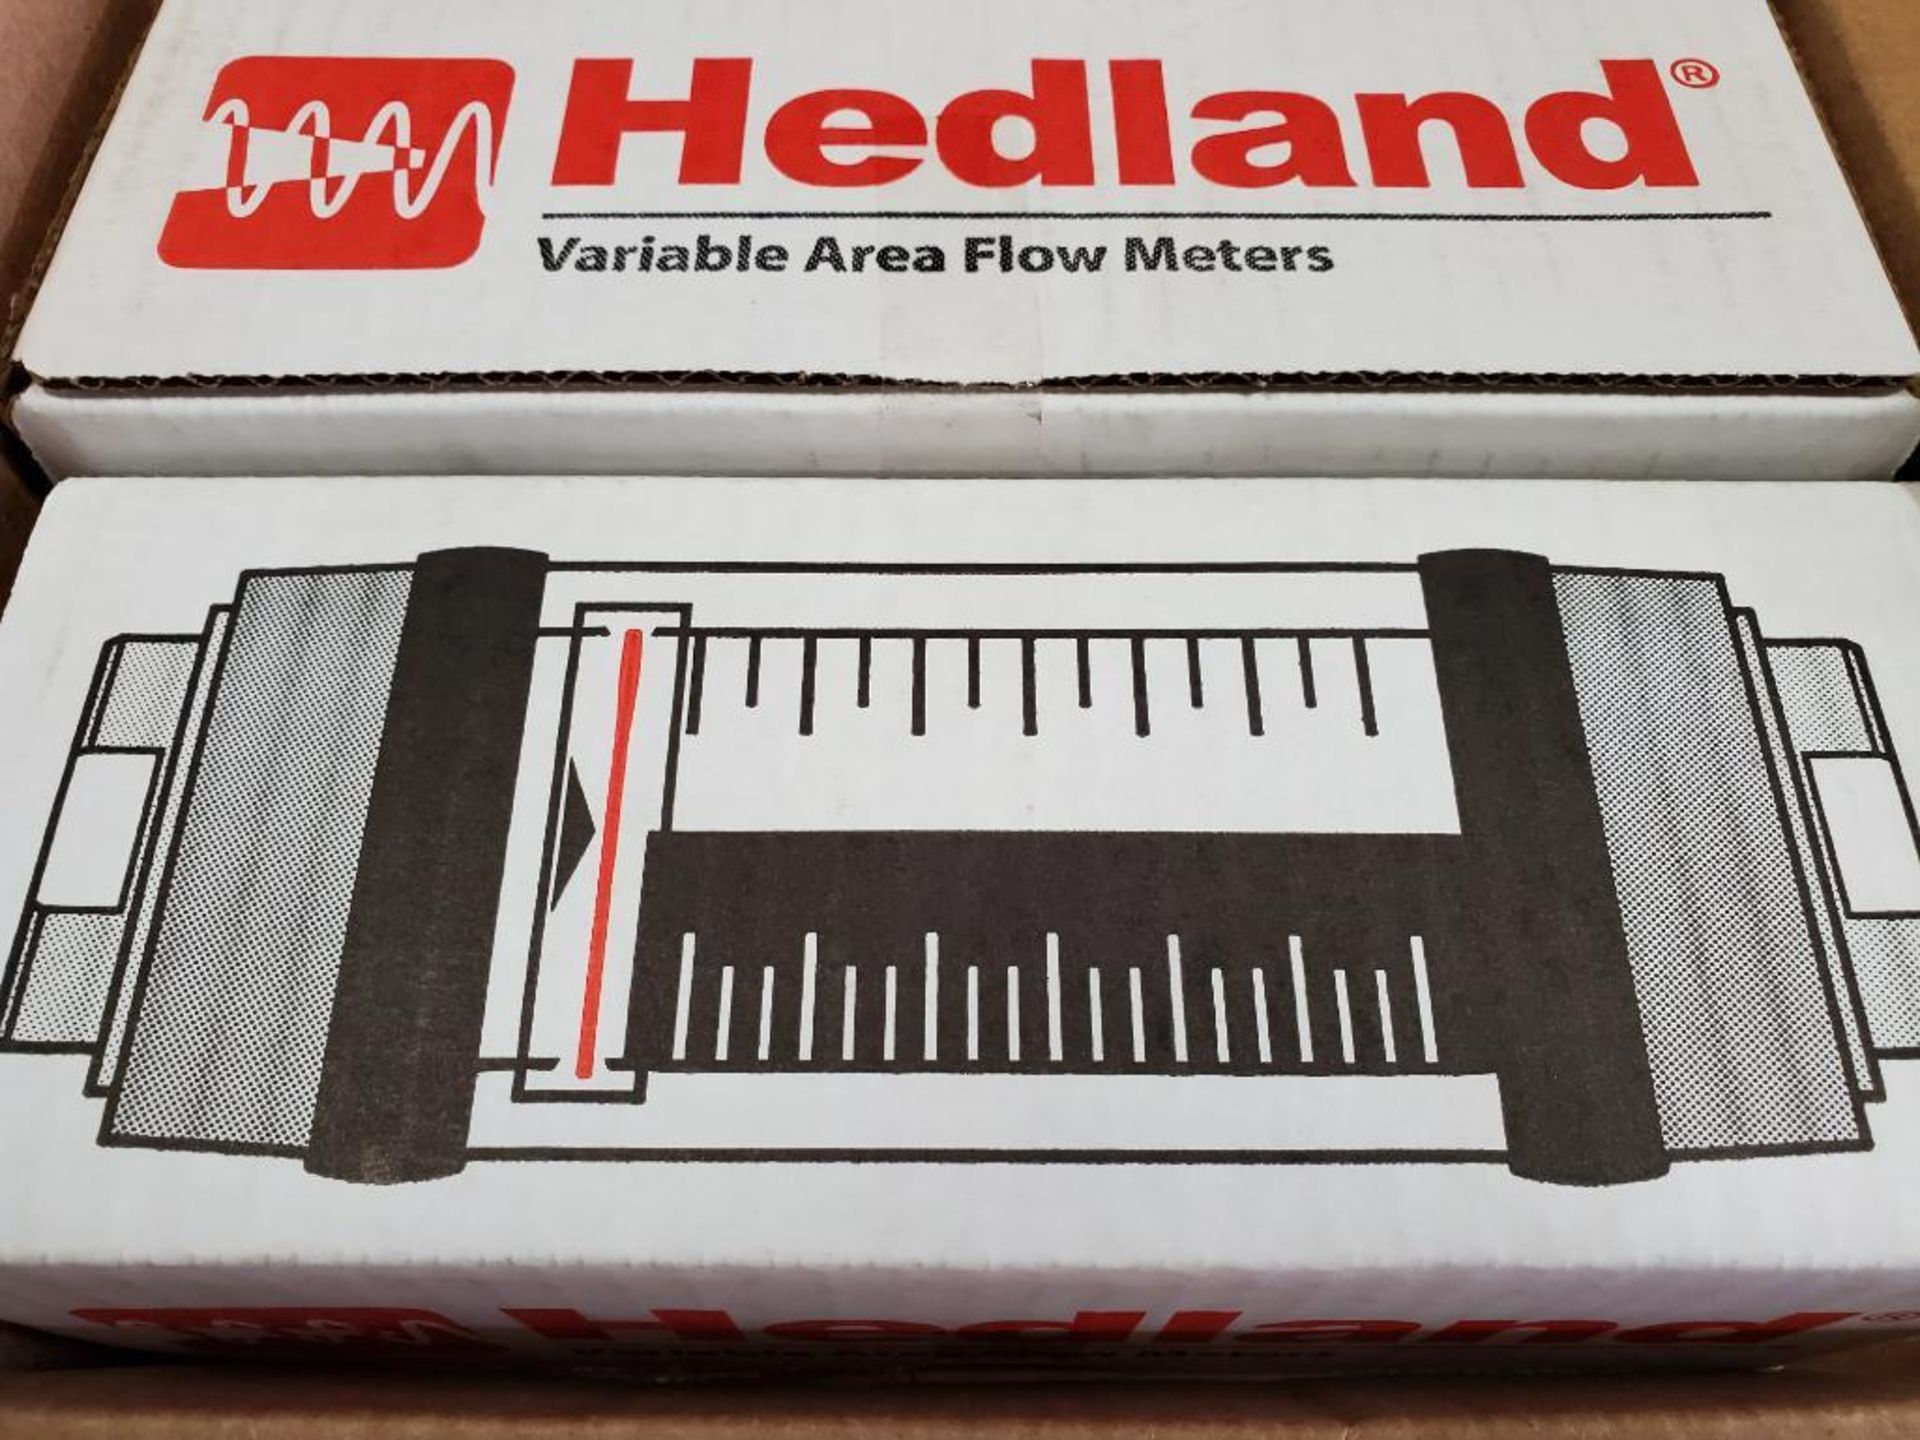 Qty 4 - Hedland variable area flow meters. Part number 6JFX5. New in box. - Image 3 of 4